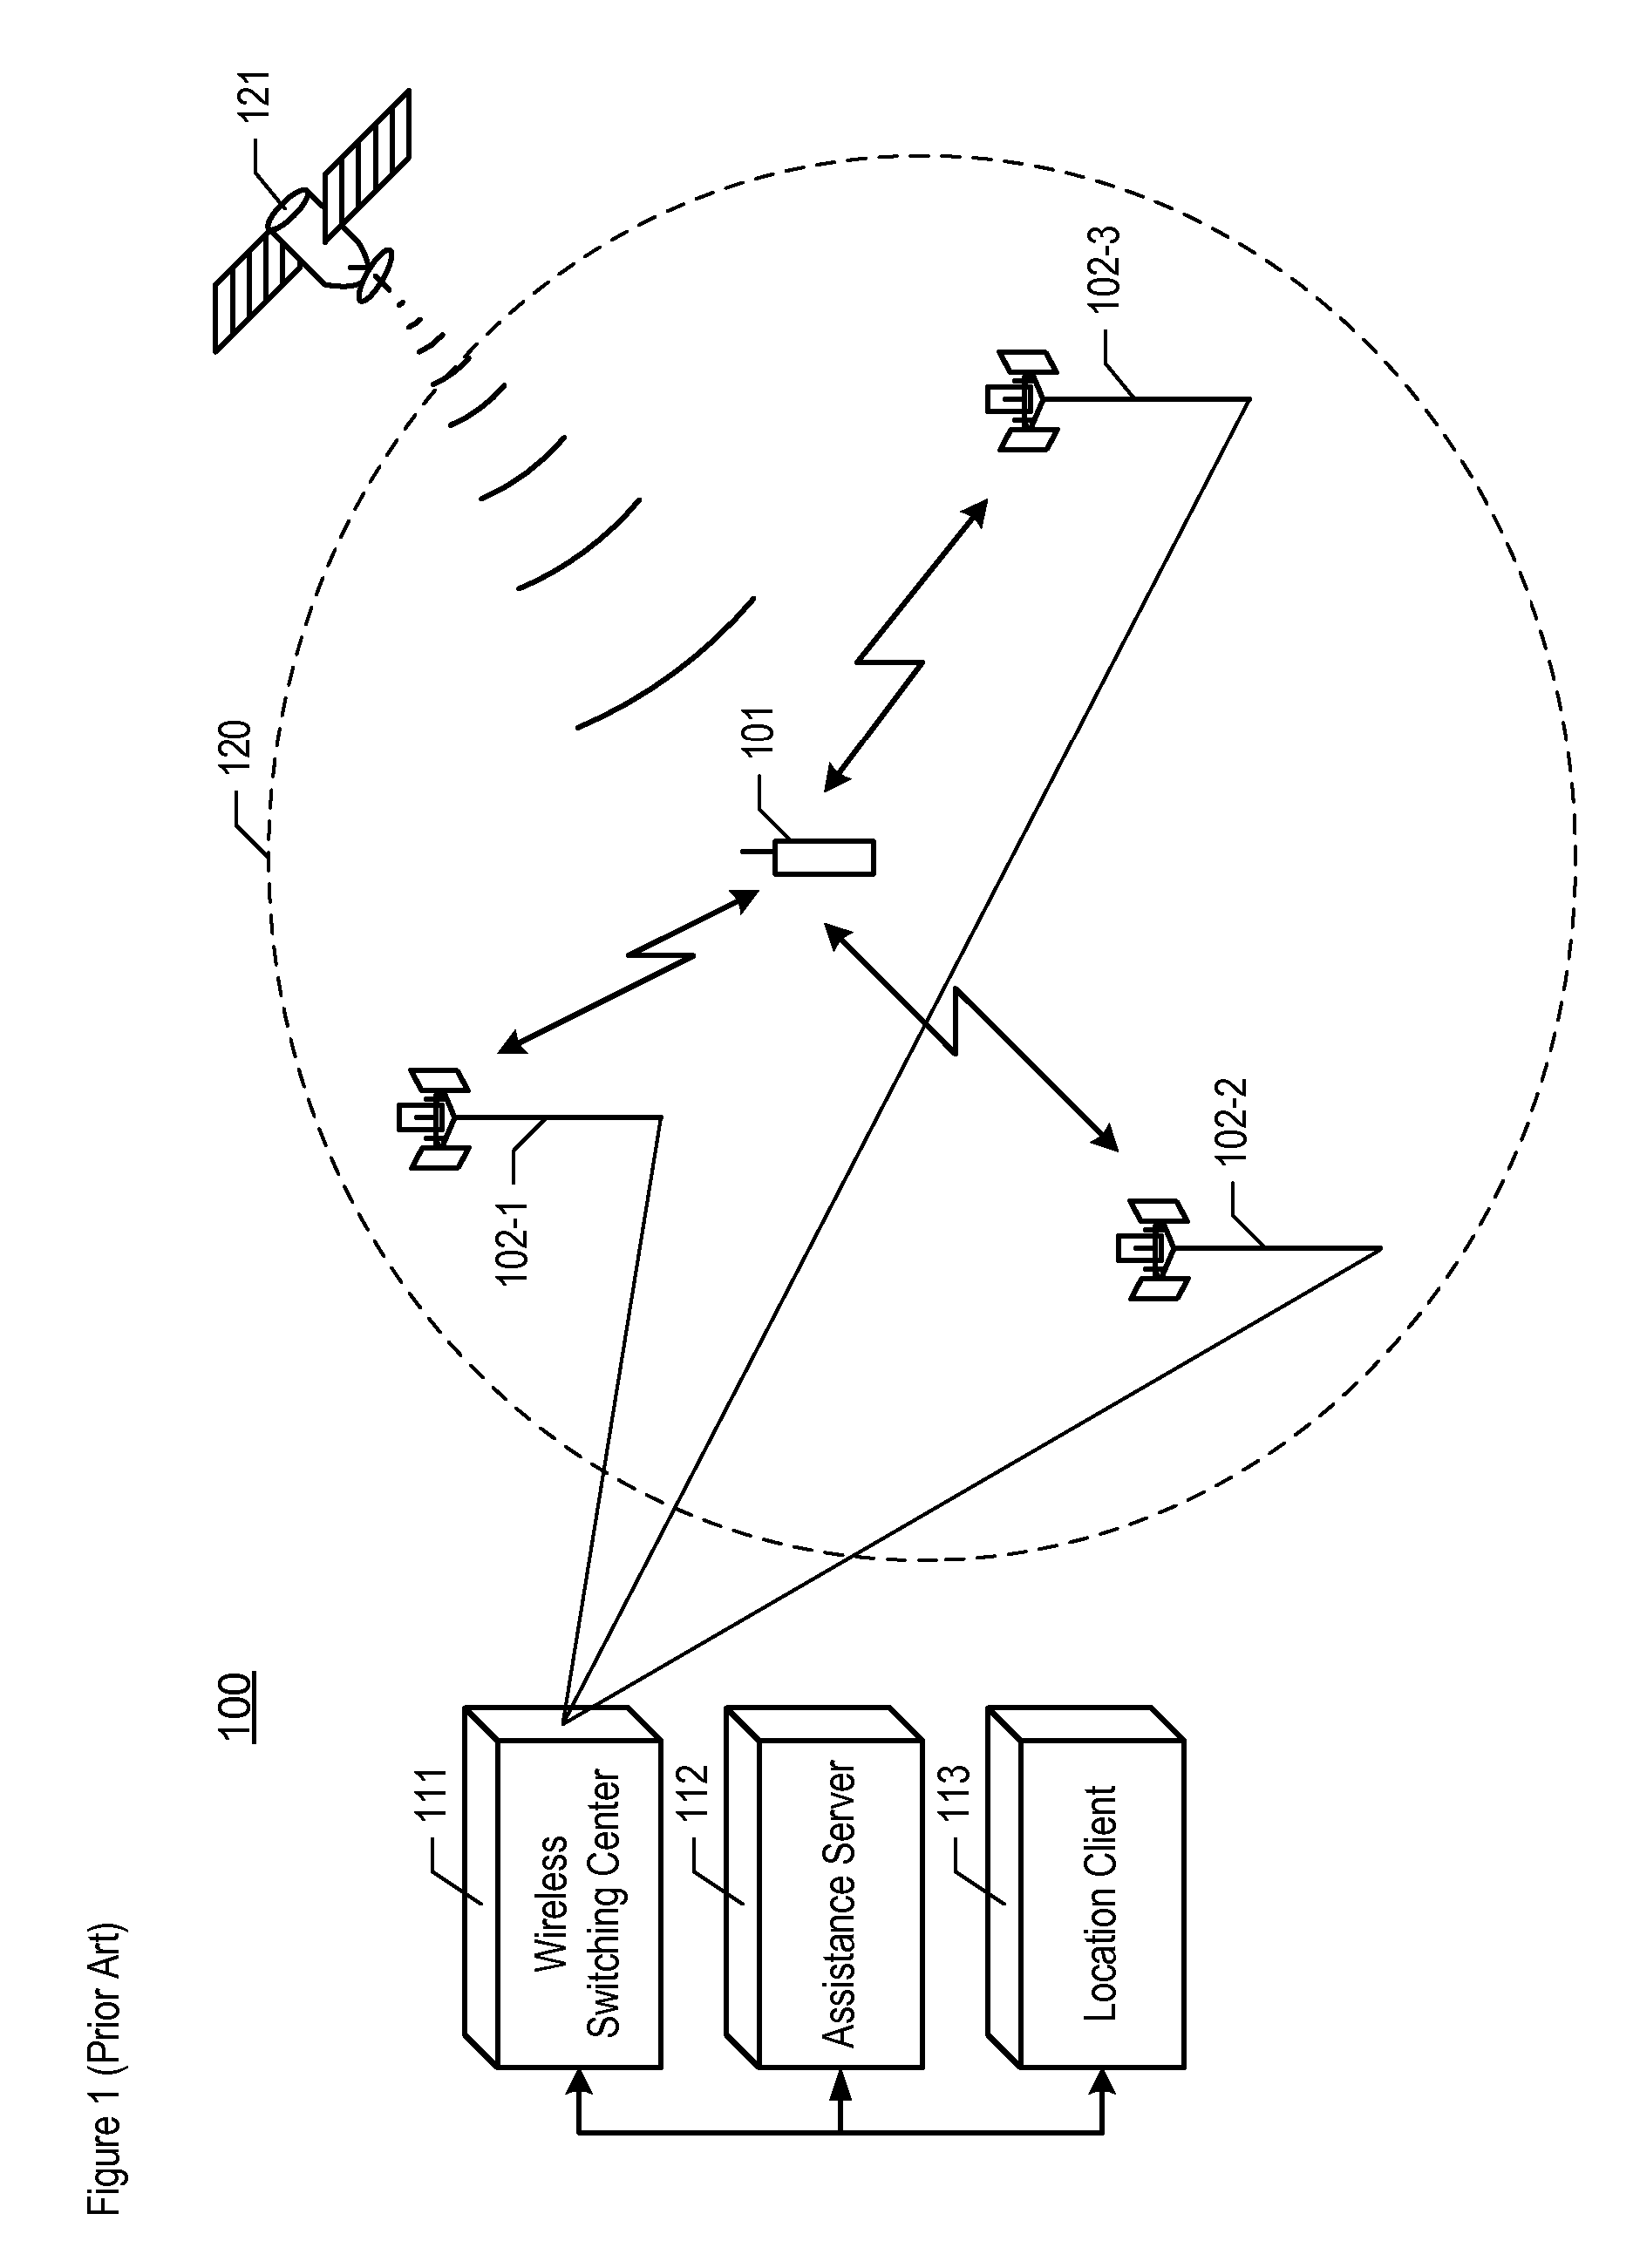 Estimating the location of a wireless terminal based on the traits of the multipath components of a signal